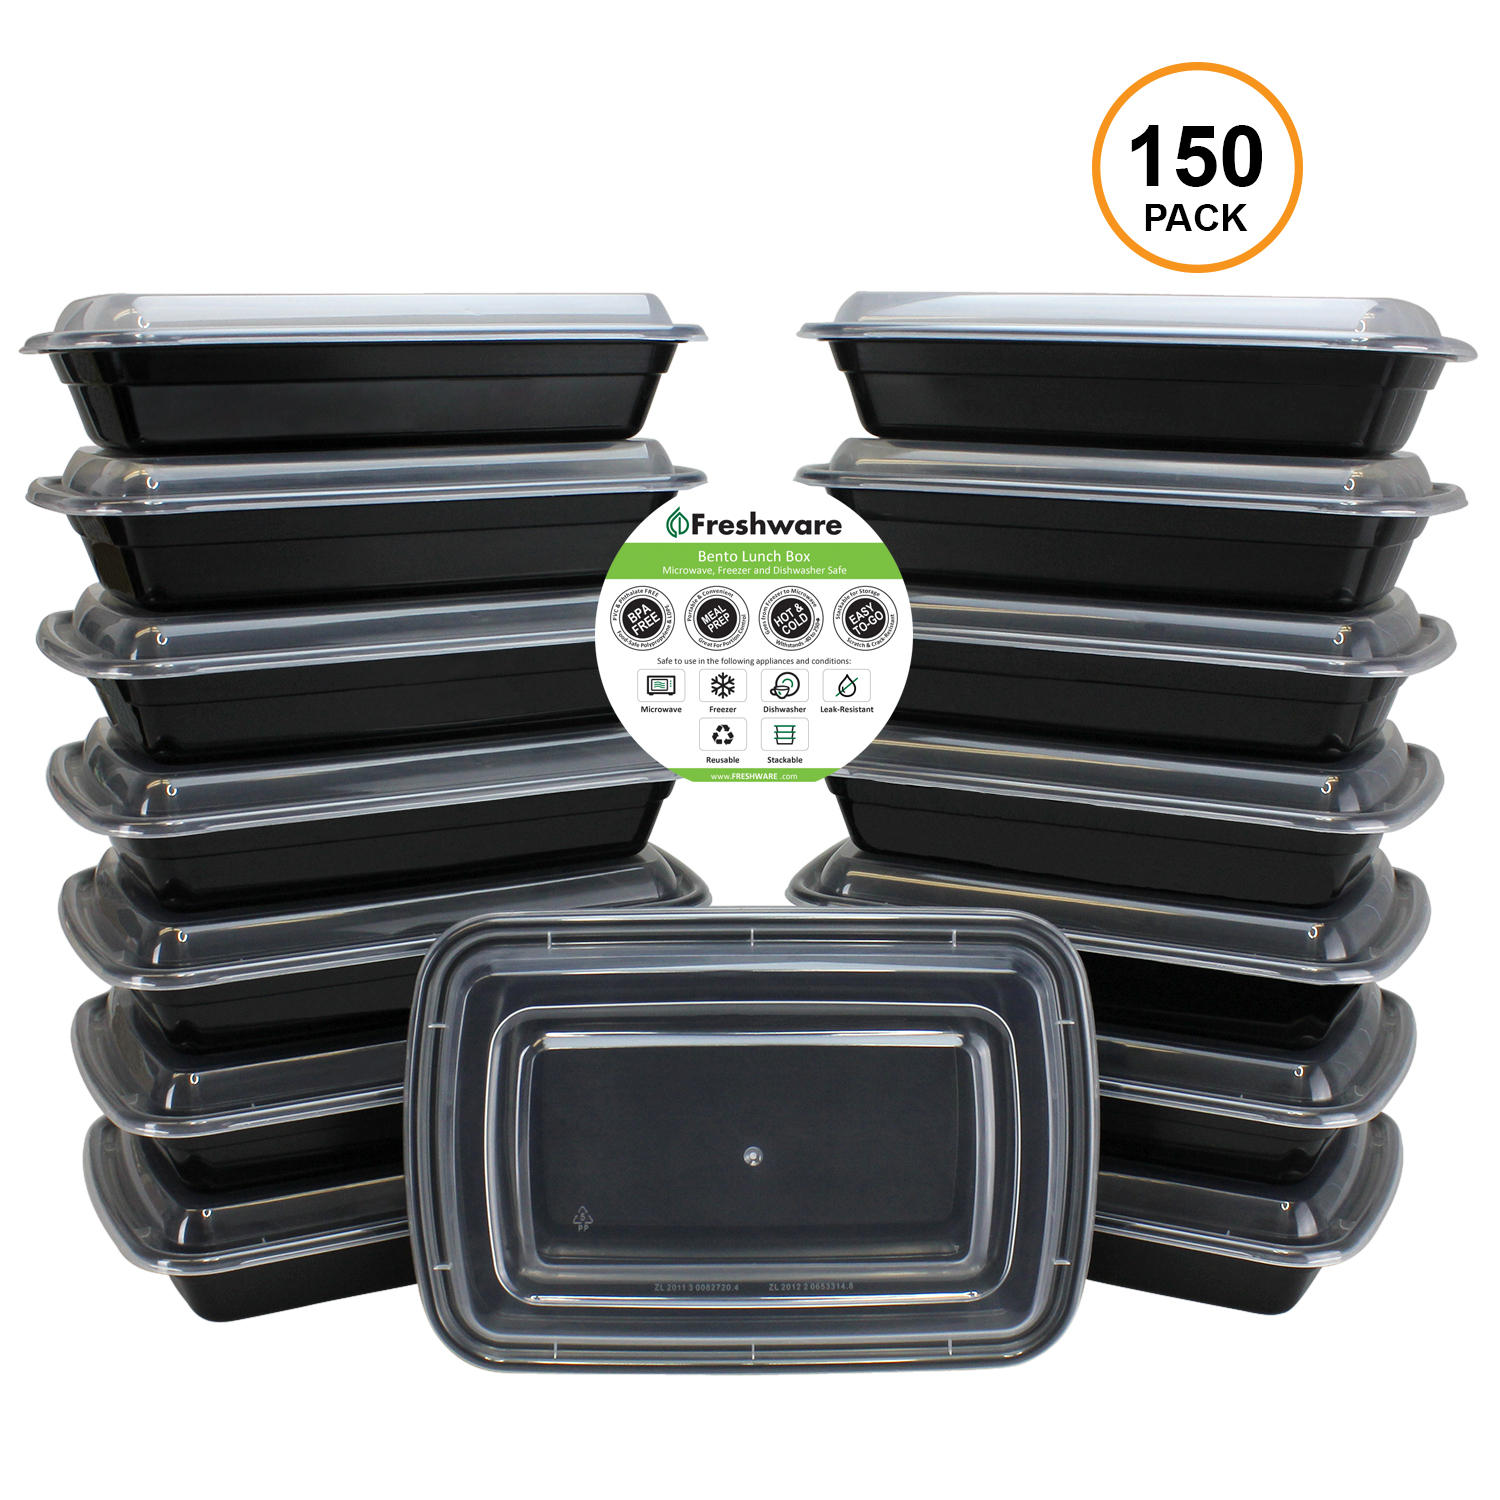 Freshware 150-Pack 1 Compartment Bento Lunch Boxes with Lids - Meal Prep, Portion Control, 21 Day Fix & Food Storage Containers (28oz)